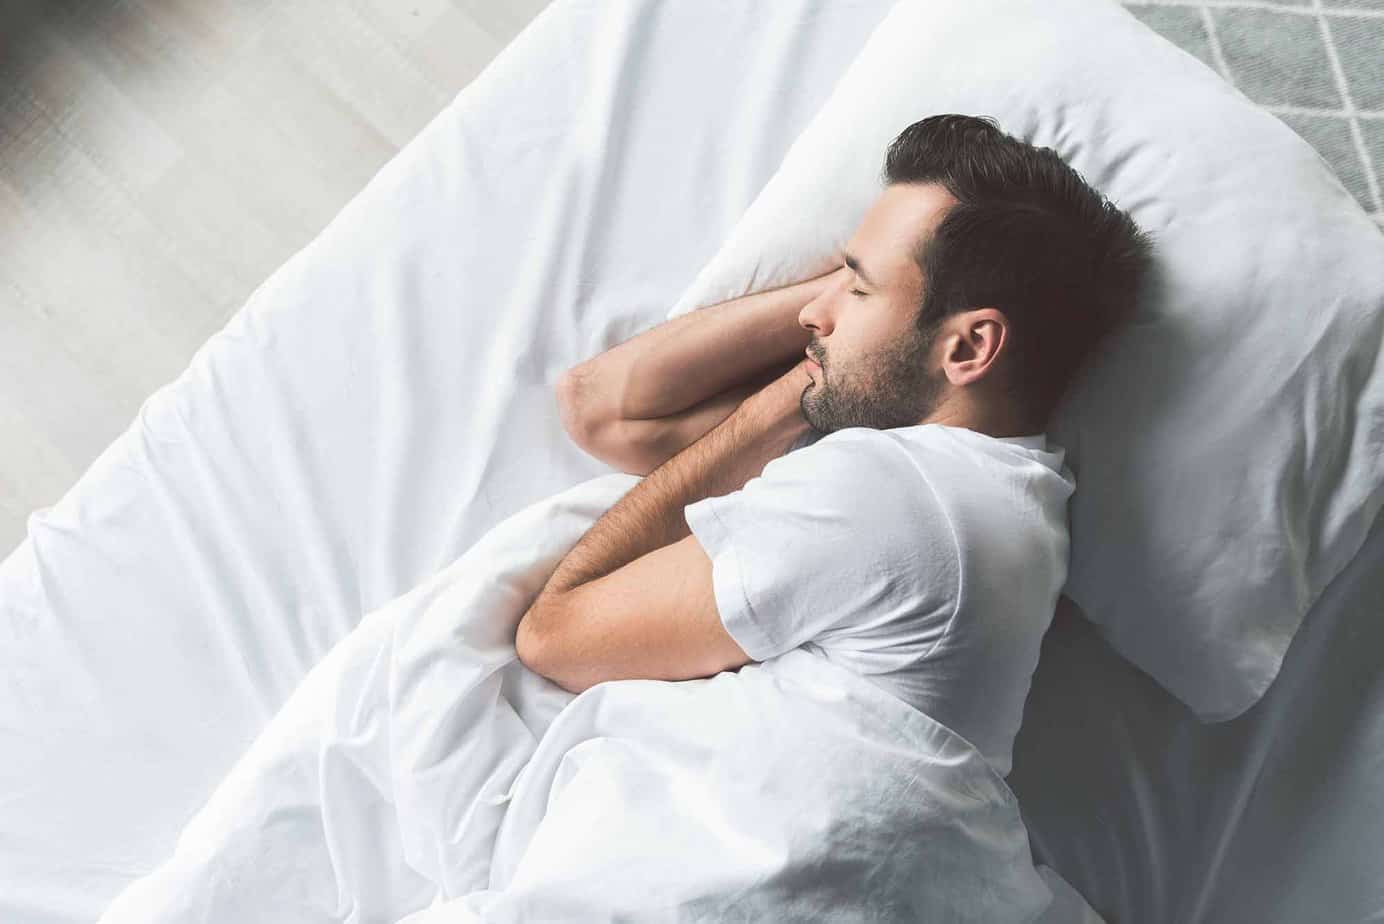 7 Easy Tips for Better Sleep in Early Recovery